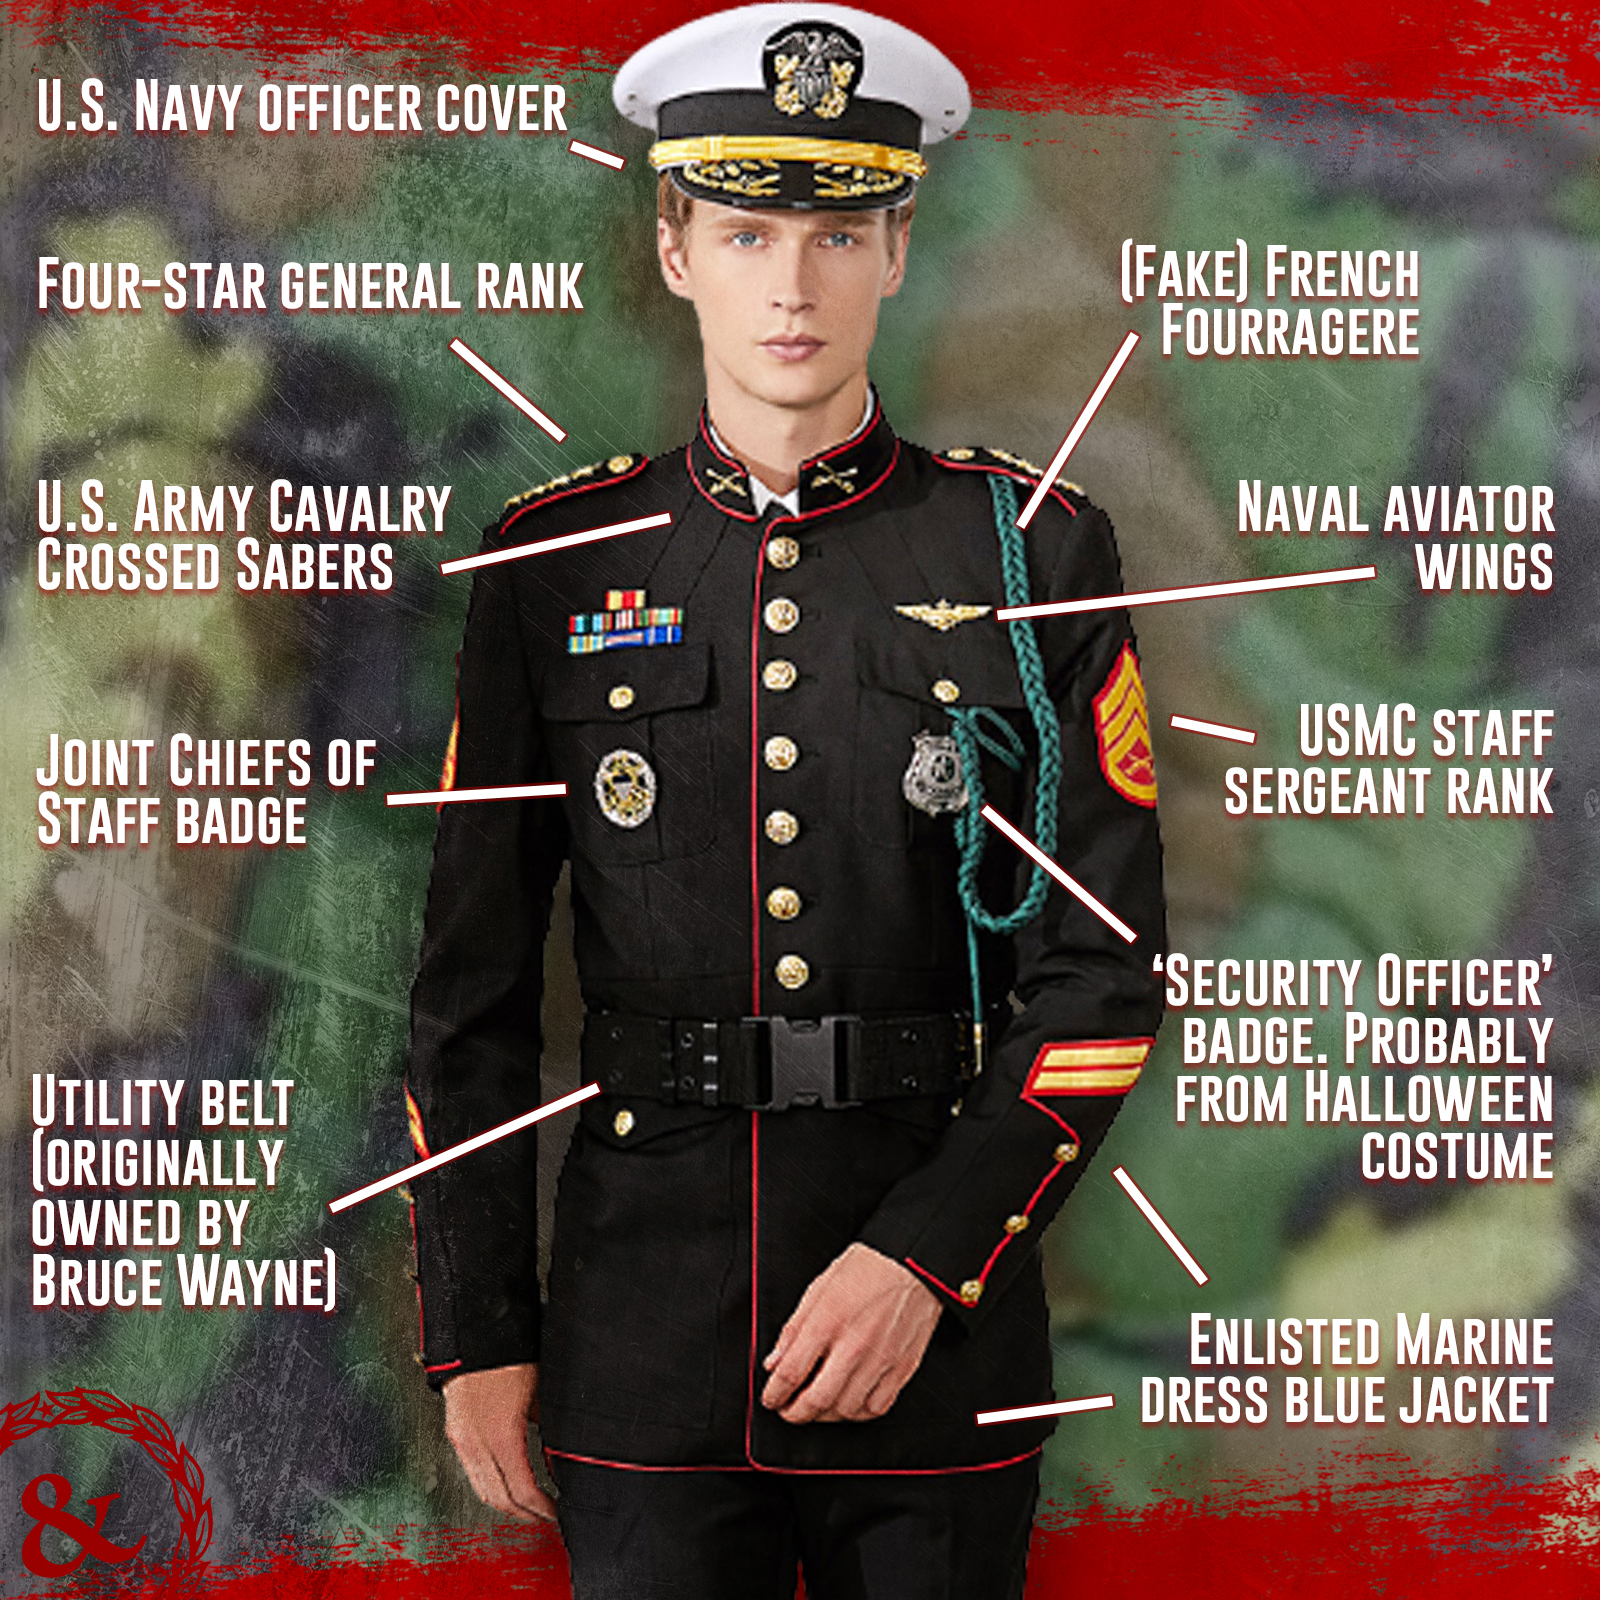 This US military officer uniform is for sale Here s everything wrong